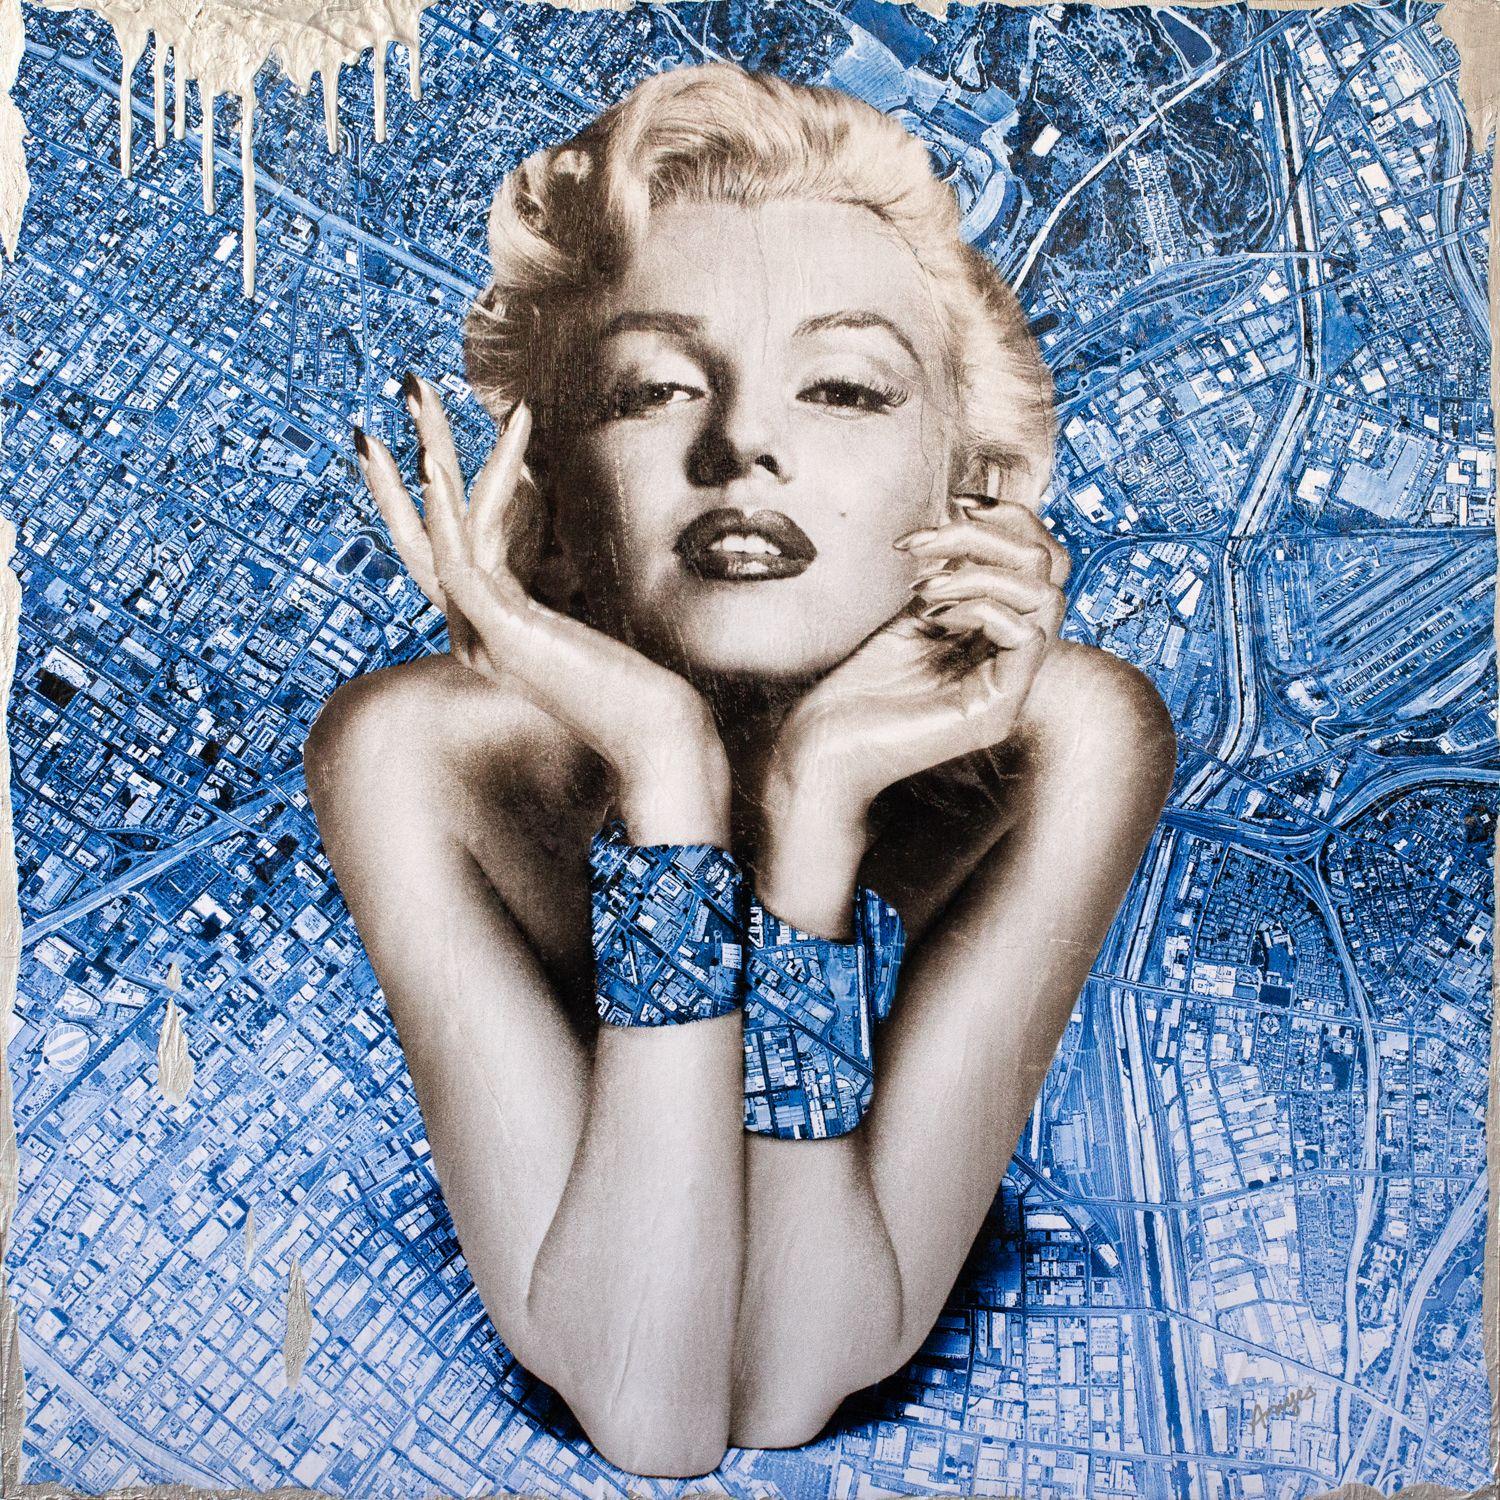 Mixed media art on texturized wood. Created by collaging various prints of an iconic image I created digitally by combining a found photo of Marilyn Monroe with satellite pictures of the  Los Angeles downtown area. The prints are torn and distressed